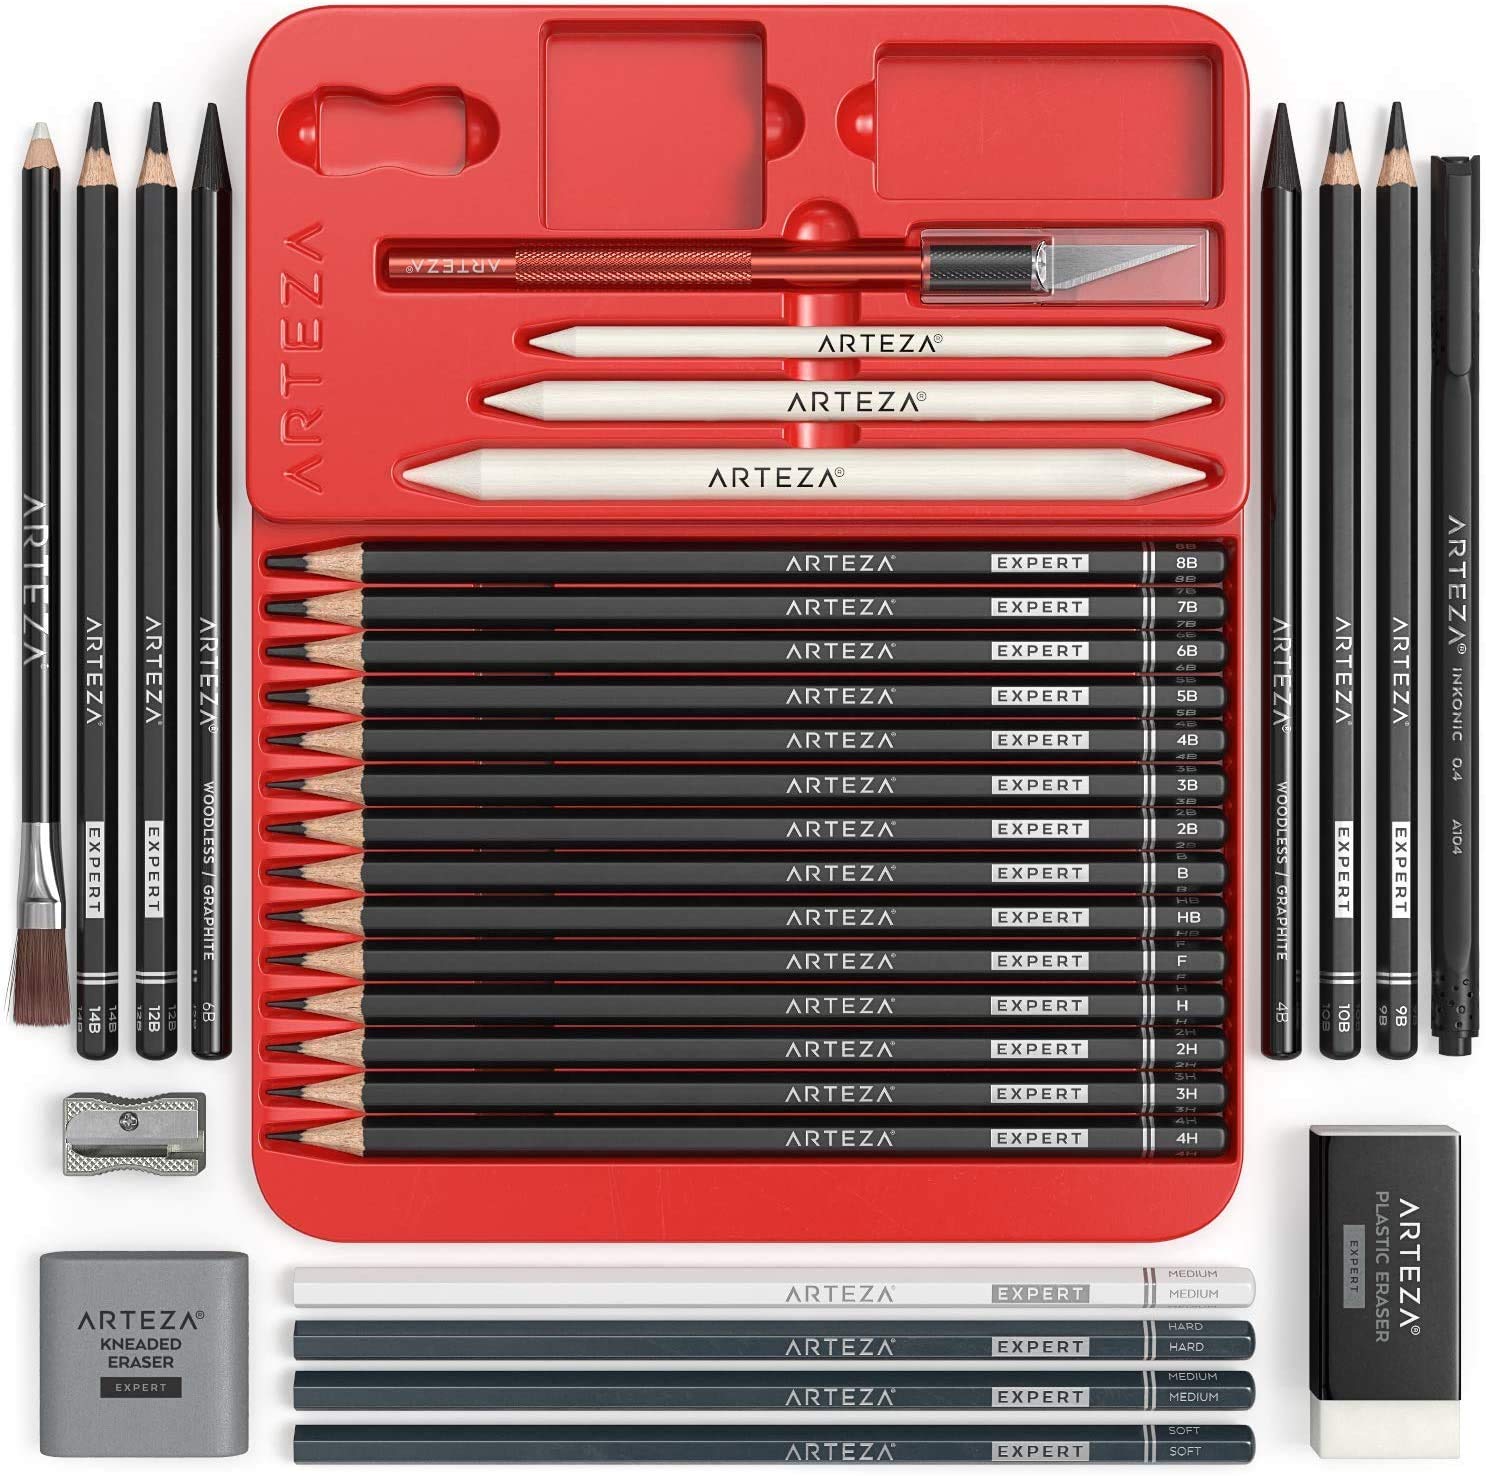 Arteza Drawing Set for Adults, Set of 33 Artist Sketching Tools, 20 Graphite & 4 Charcoal Sketch Pencils, 1 Fineliner, 3 Blenders, 1 Sharpener, 3 Erasers & 1 Hobby Knife, Art Supplies for Drawing